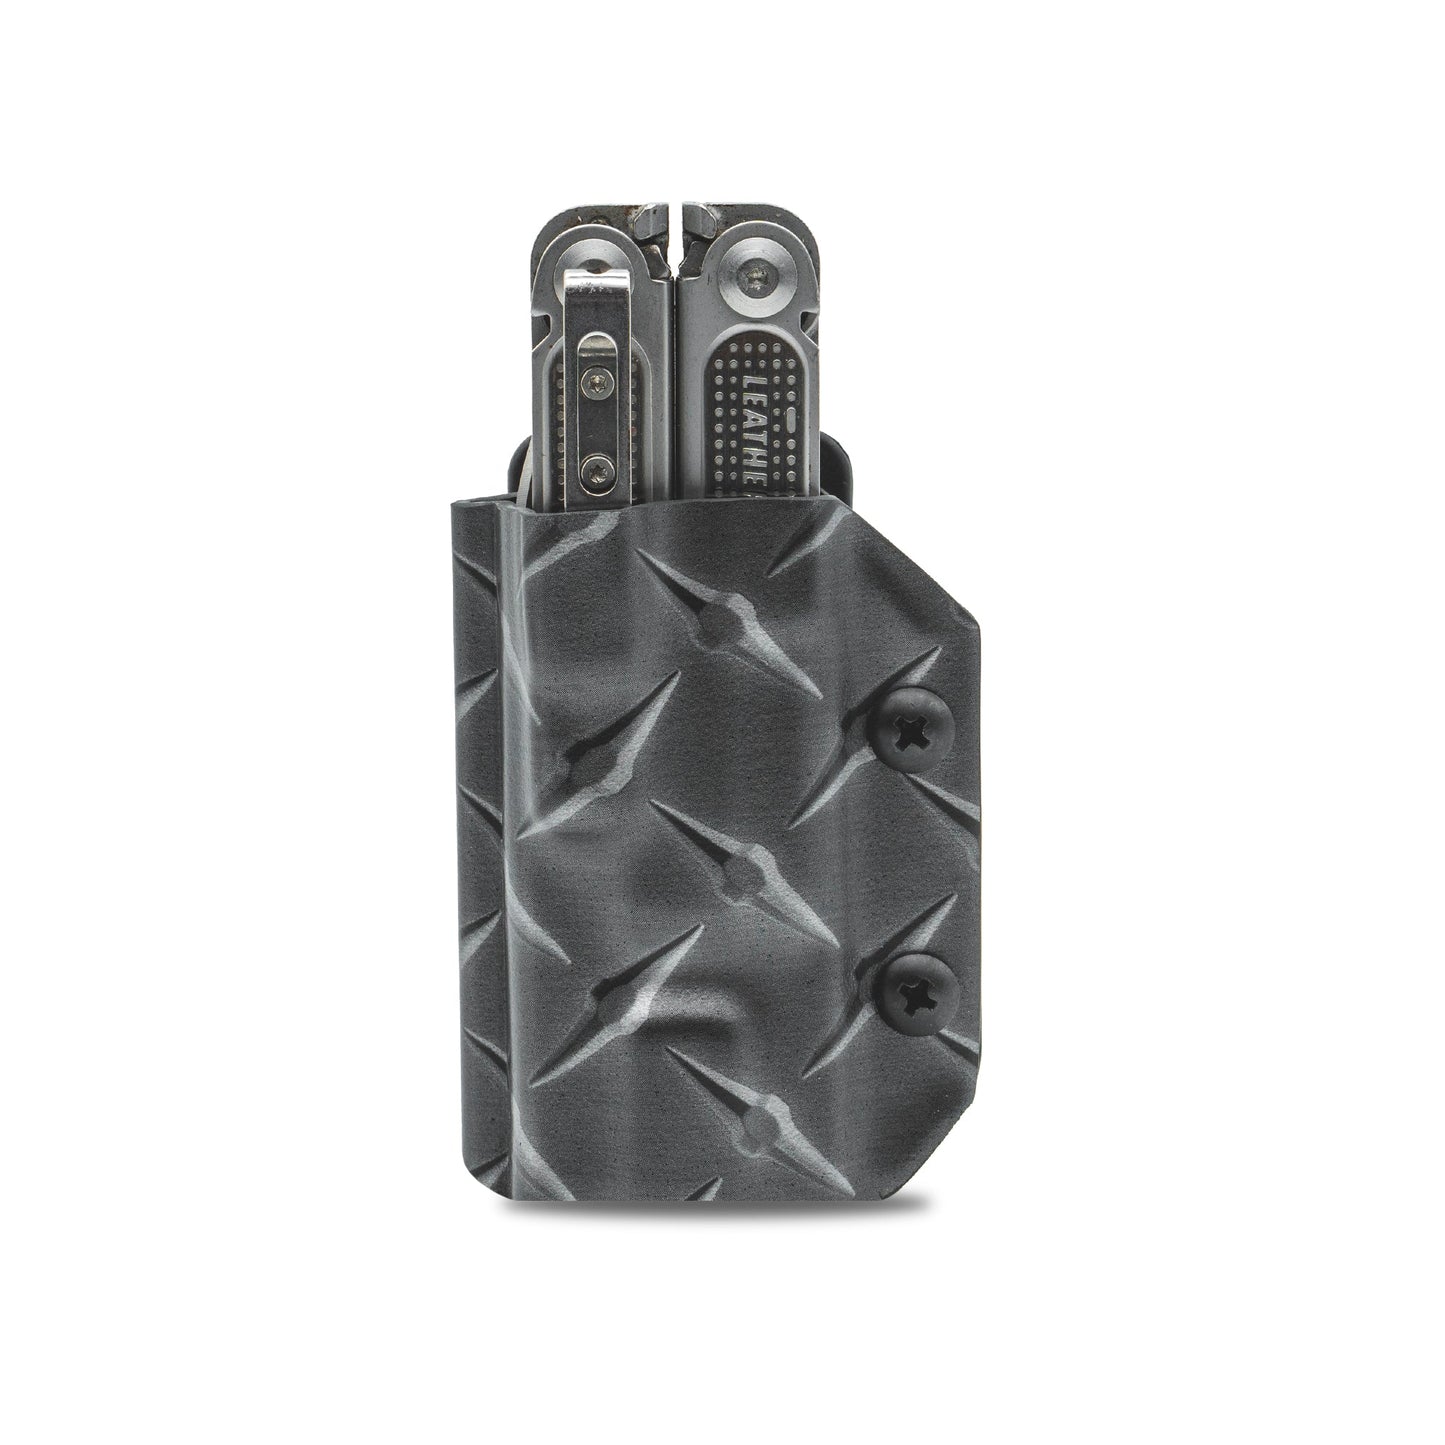 Kydex Sheath for the Leatherman Free P4 Clip & Carry